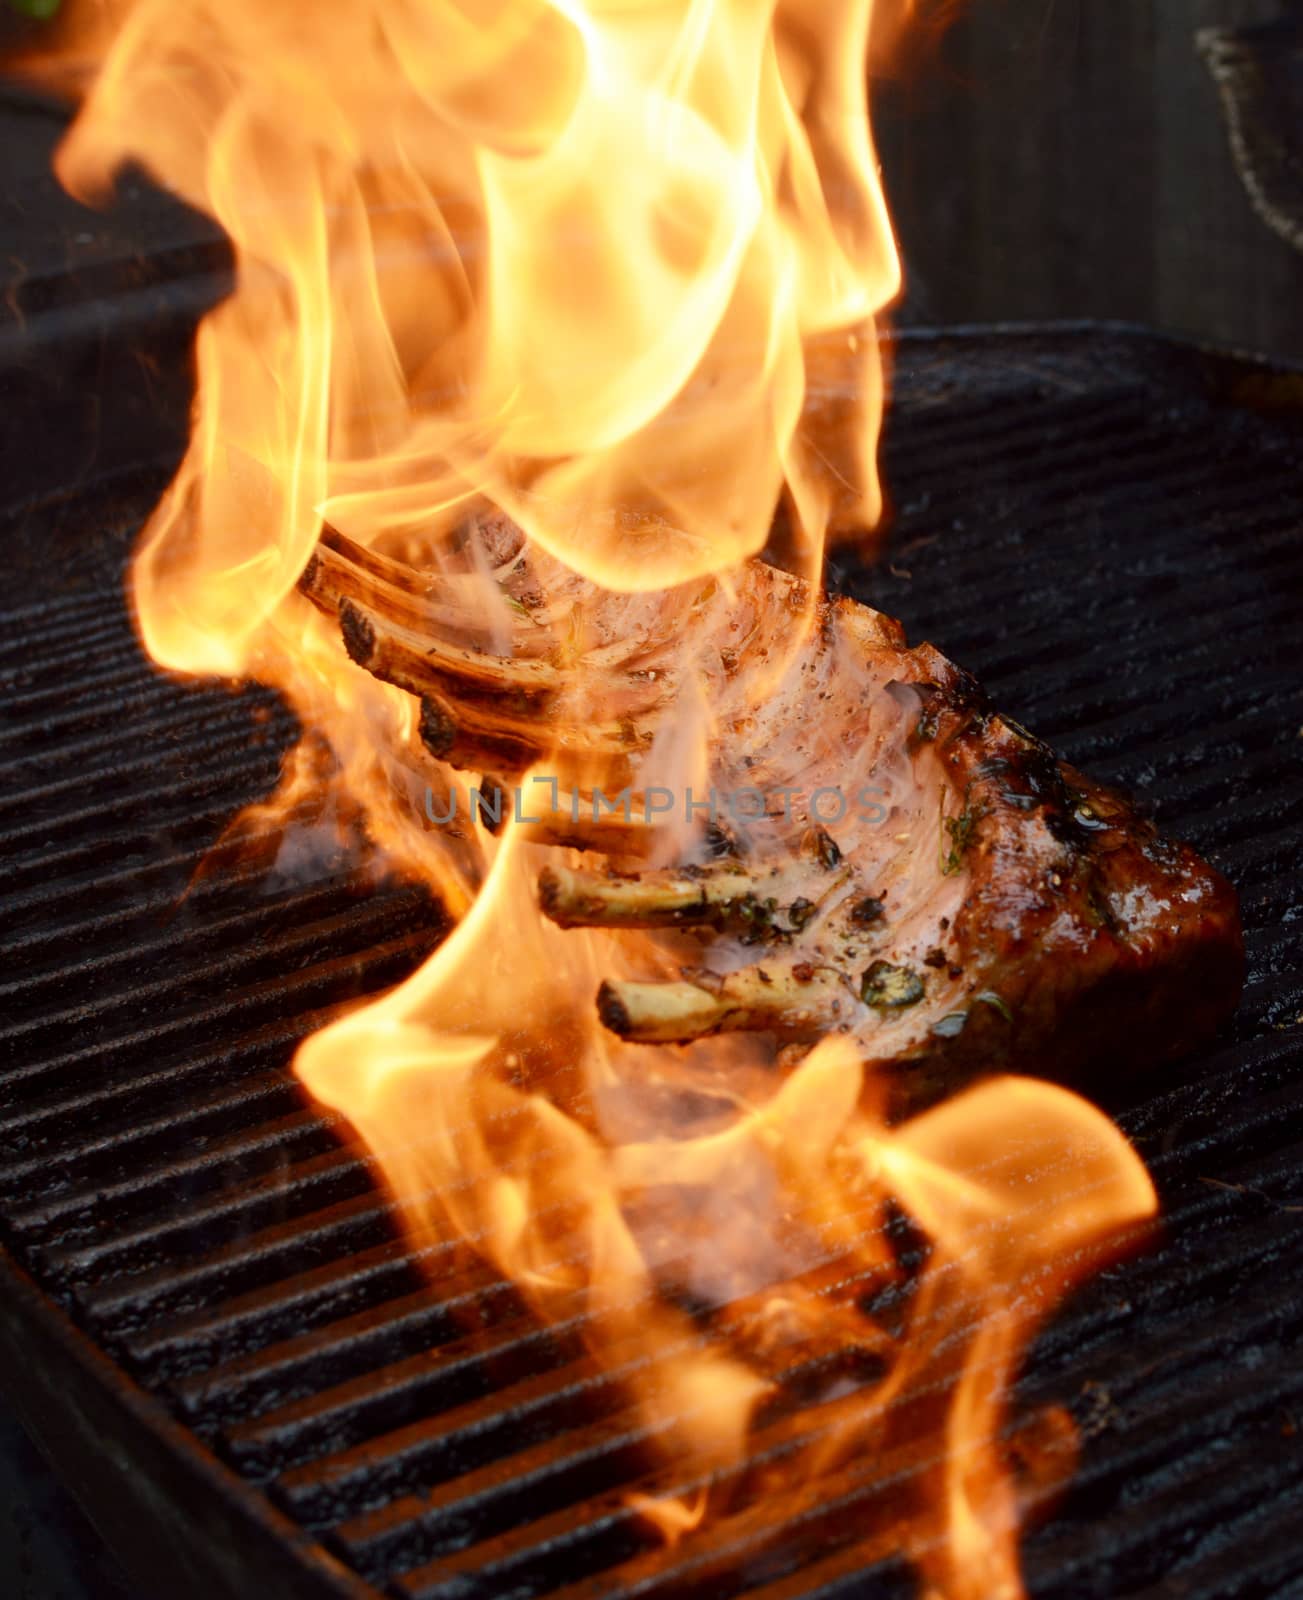 Hot flames engulf grilled meat - a rack of British lamb with 7 ribs on a barbecue